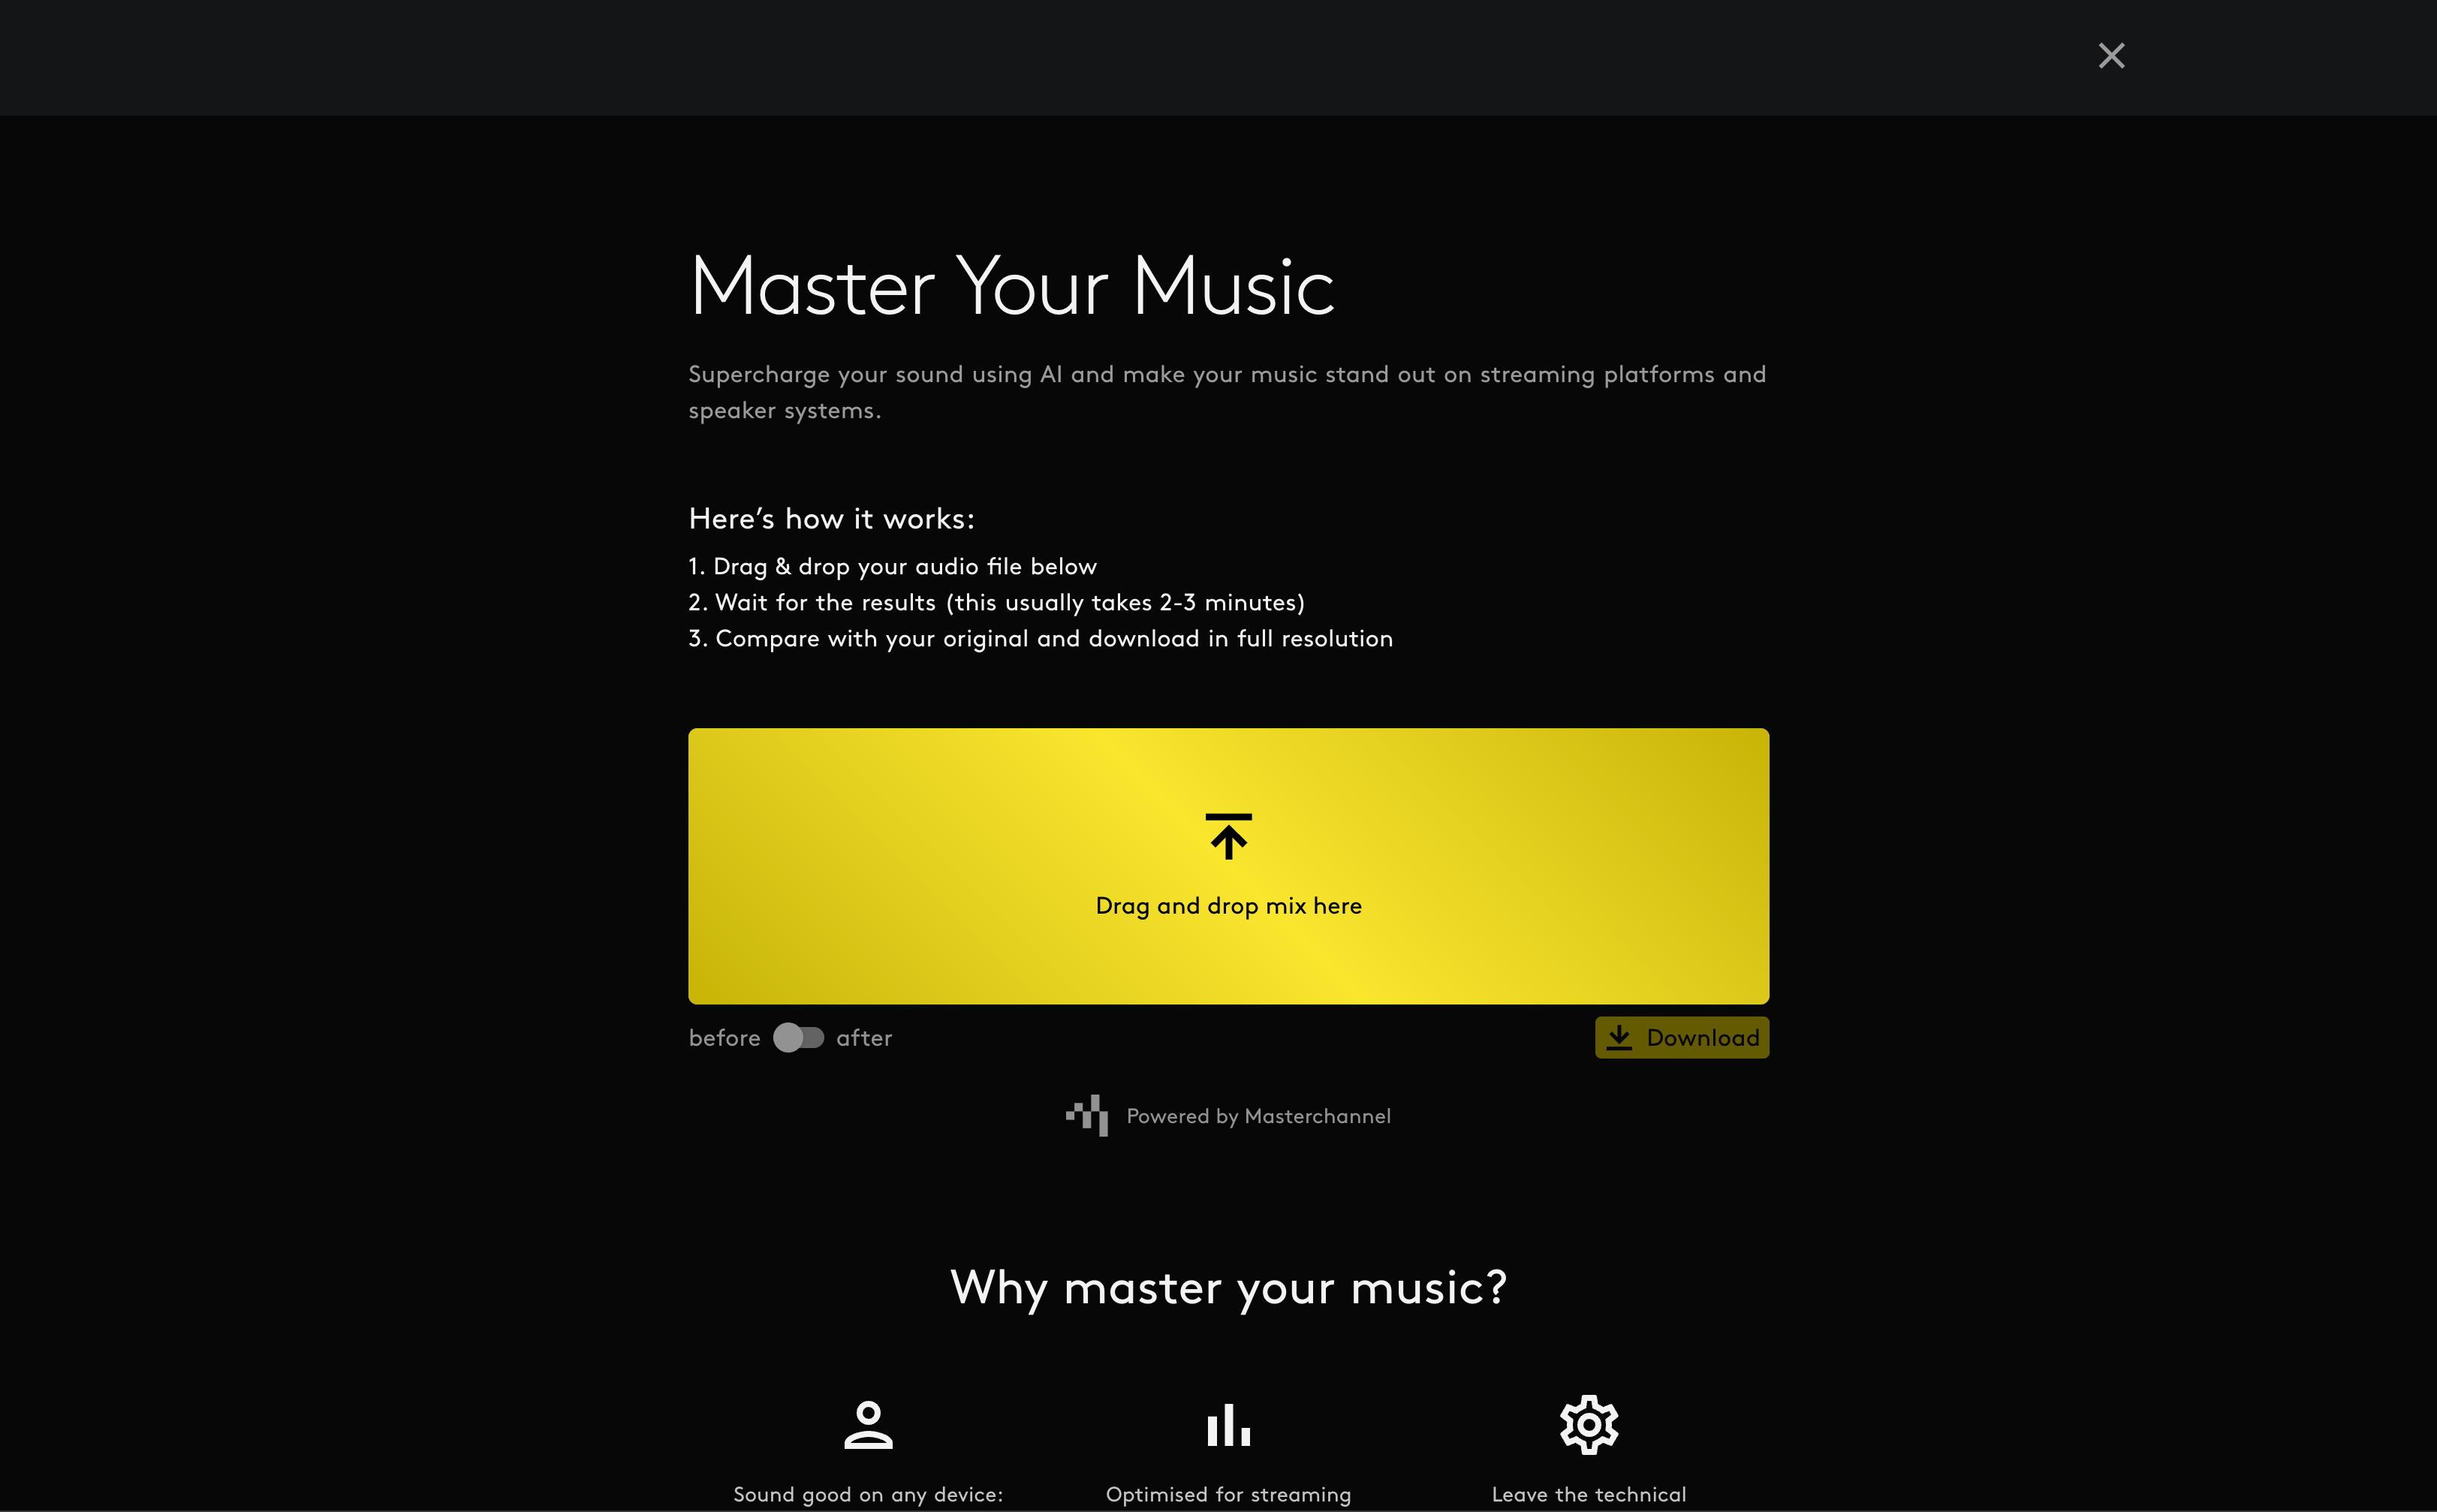 "Master Your Music" landing page on Amuse webpage in black and yellow